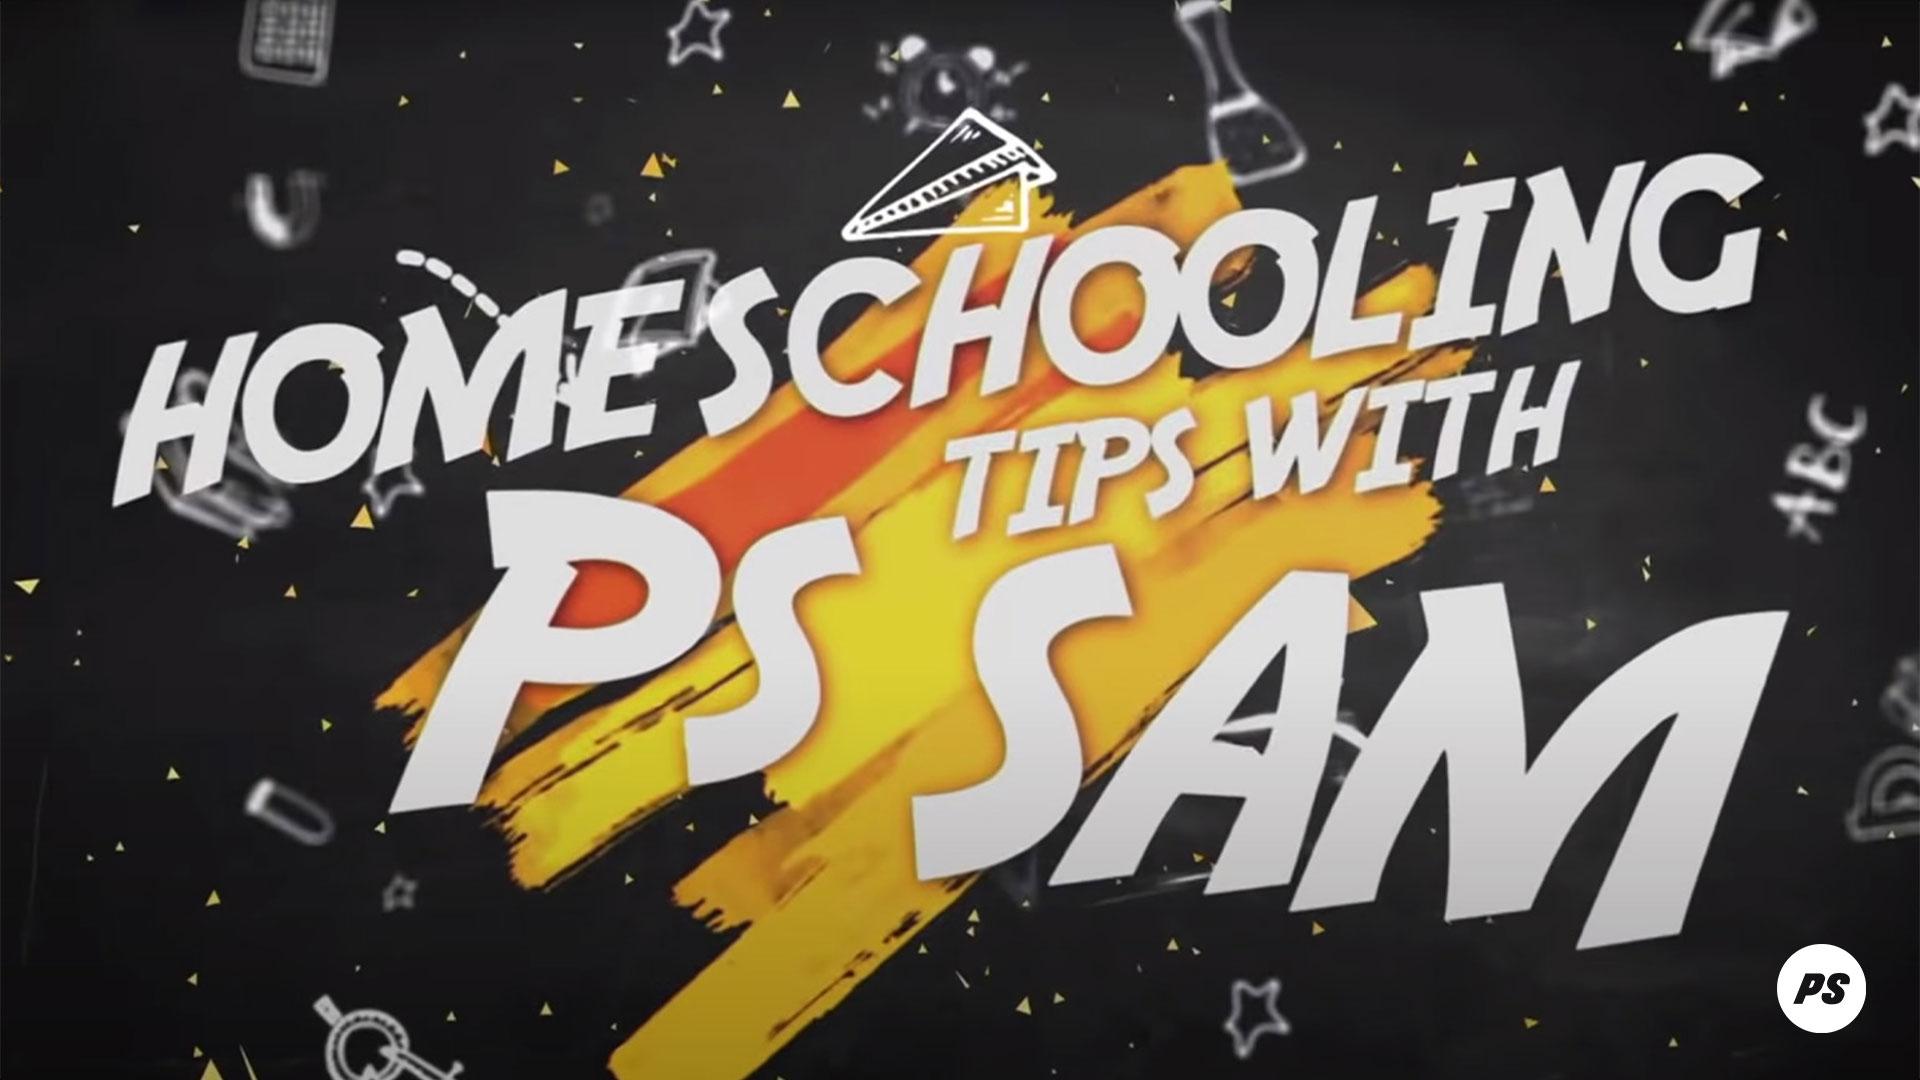 Featured Image for “Homeschooling Tips With Ps Sam”